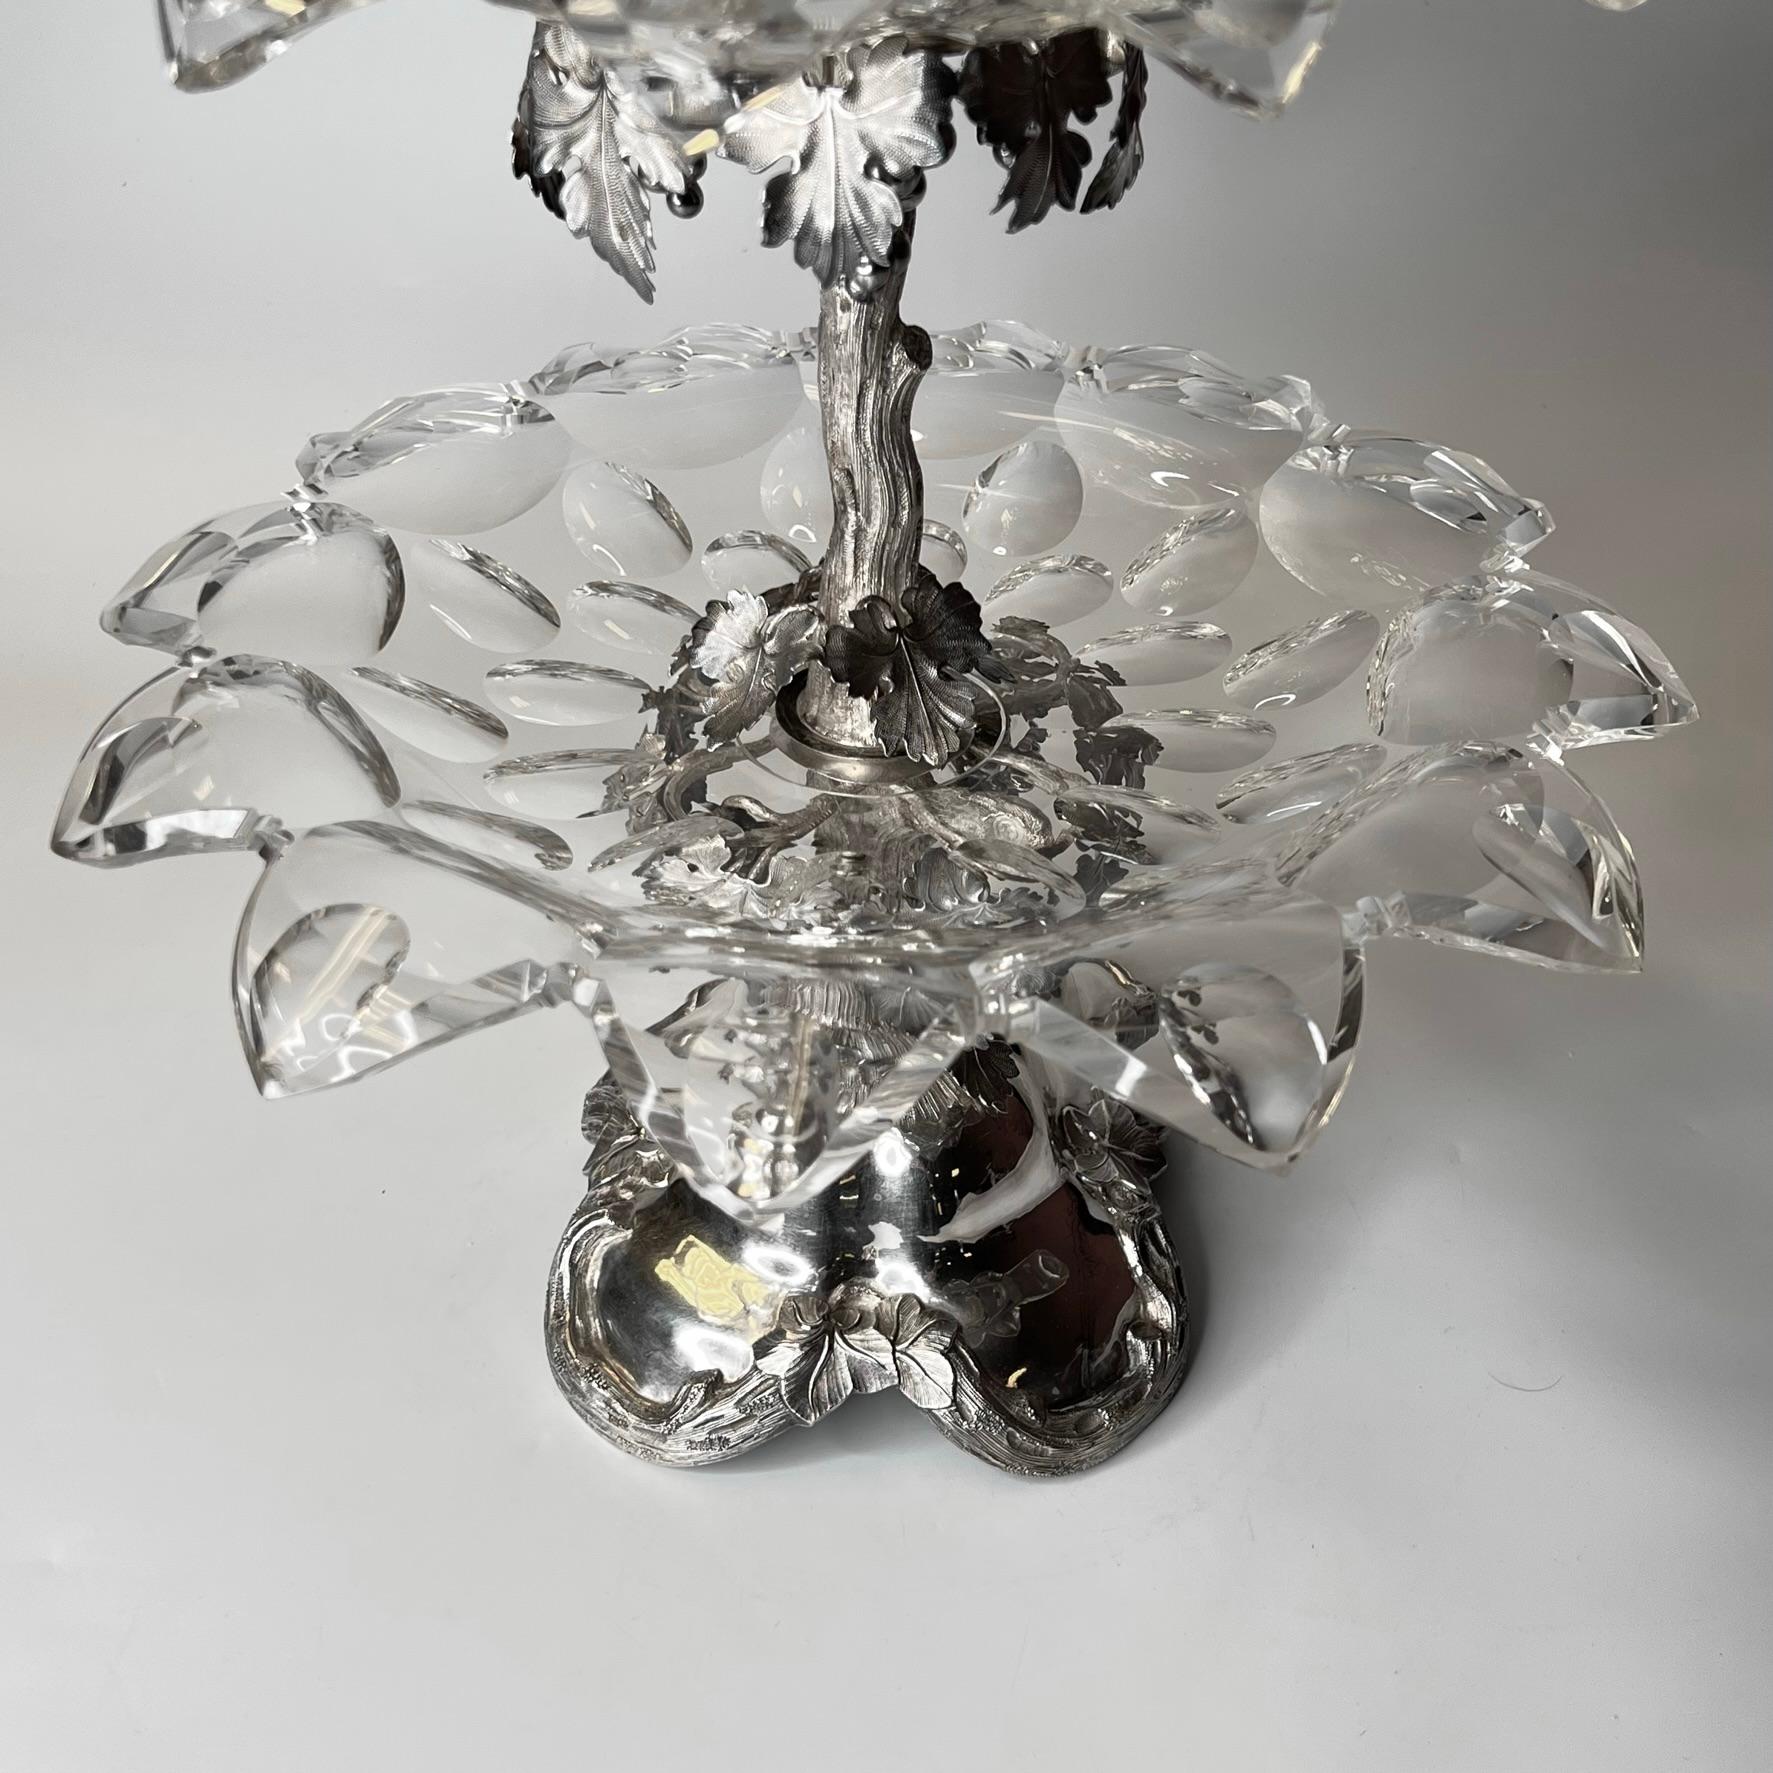 19th Century Dutch Silver and Cut Glass Dessert Stand by J.M. Van Kempen & Zoon For Sale